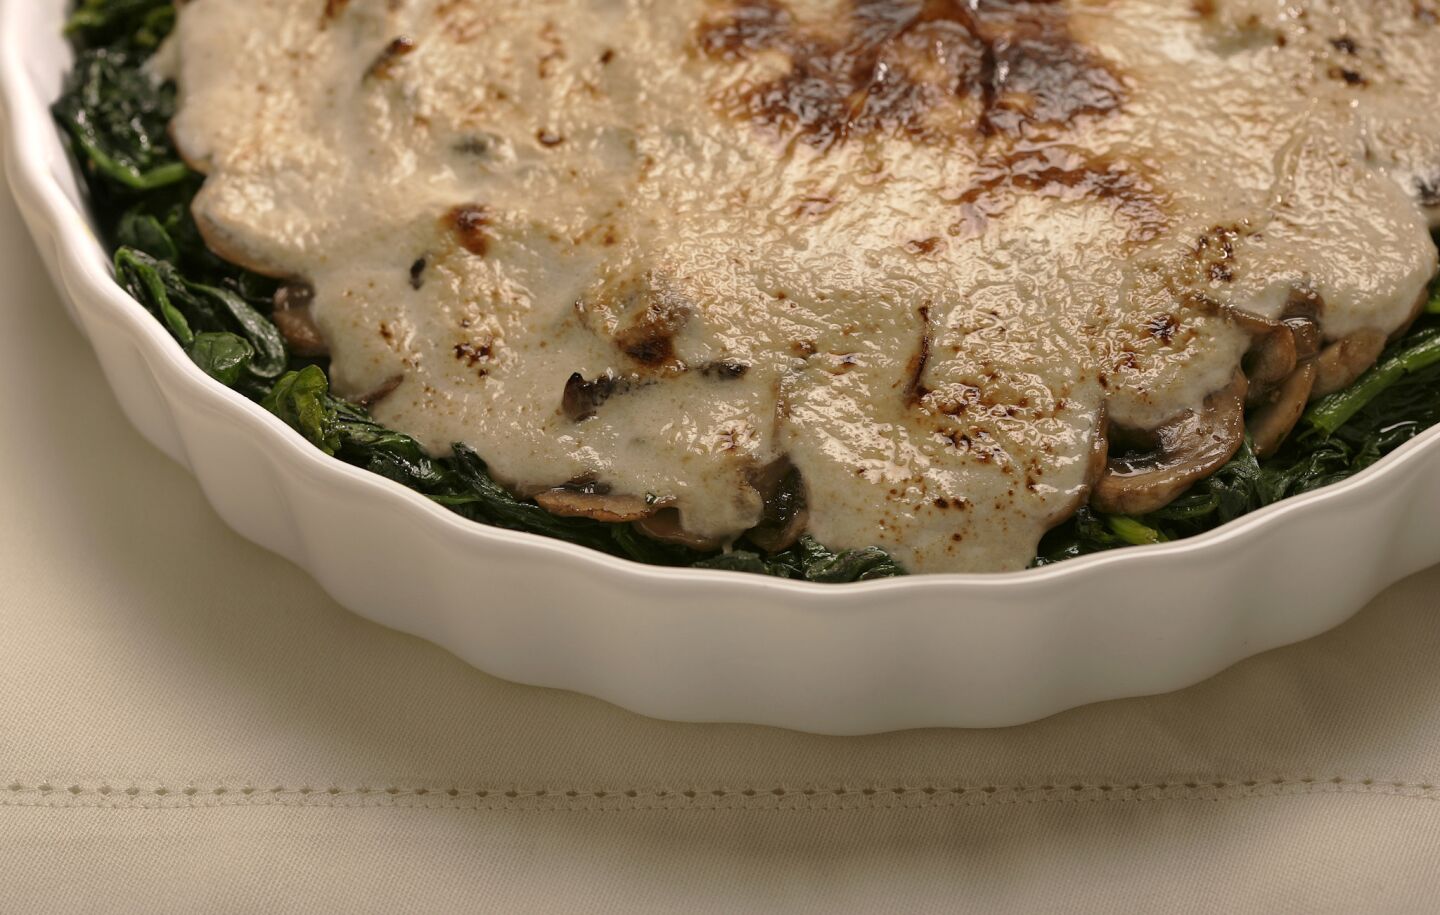 Looking at the finished product, you might never guess this gratin has only 6 ingredients. Recipe: Mushroom and spinach gratin